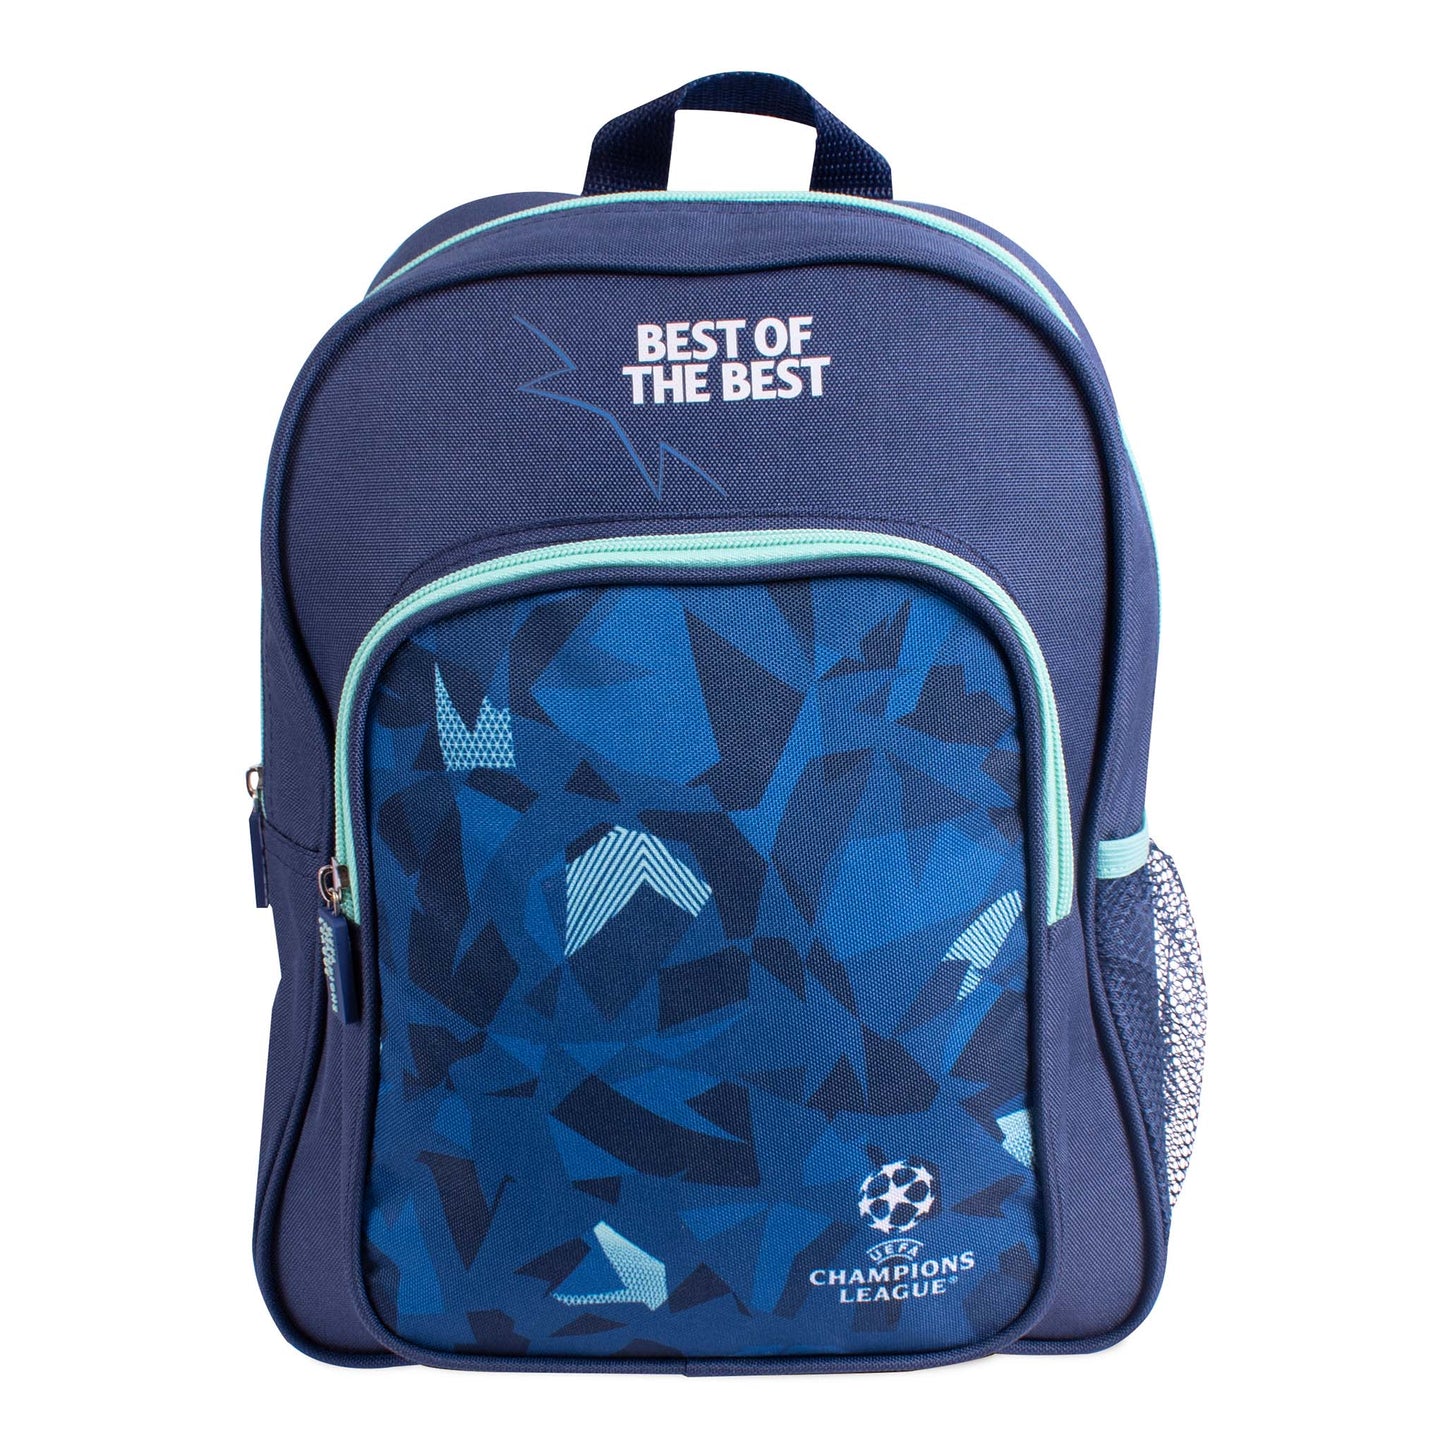 UEFA Champions League Small Backpack